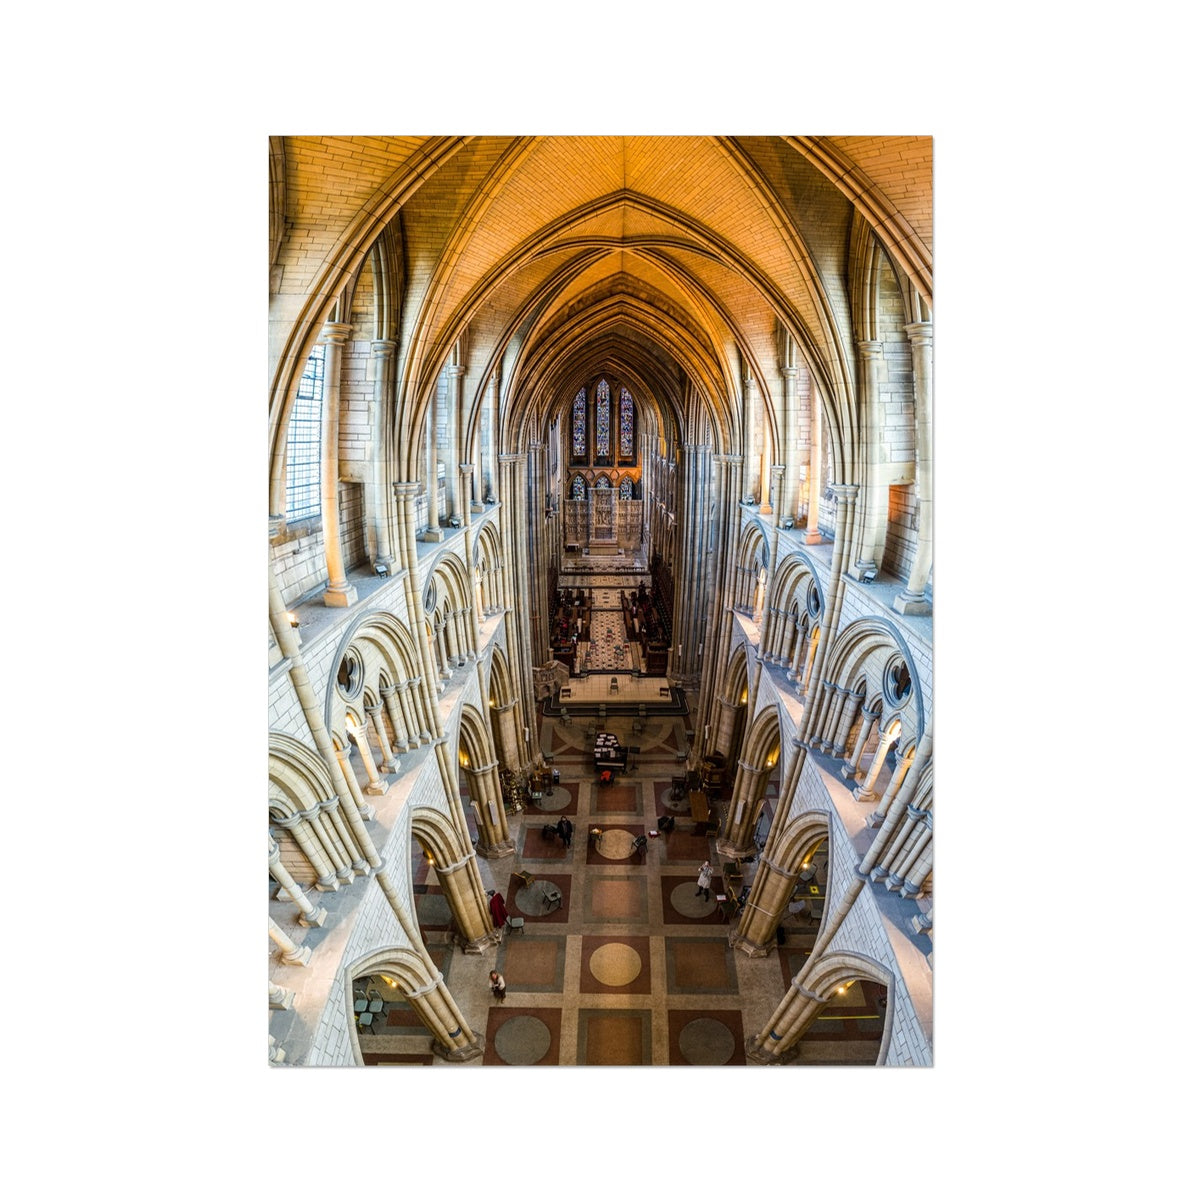 Inside Truro Cathedral ~ Photograph